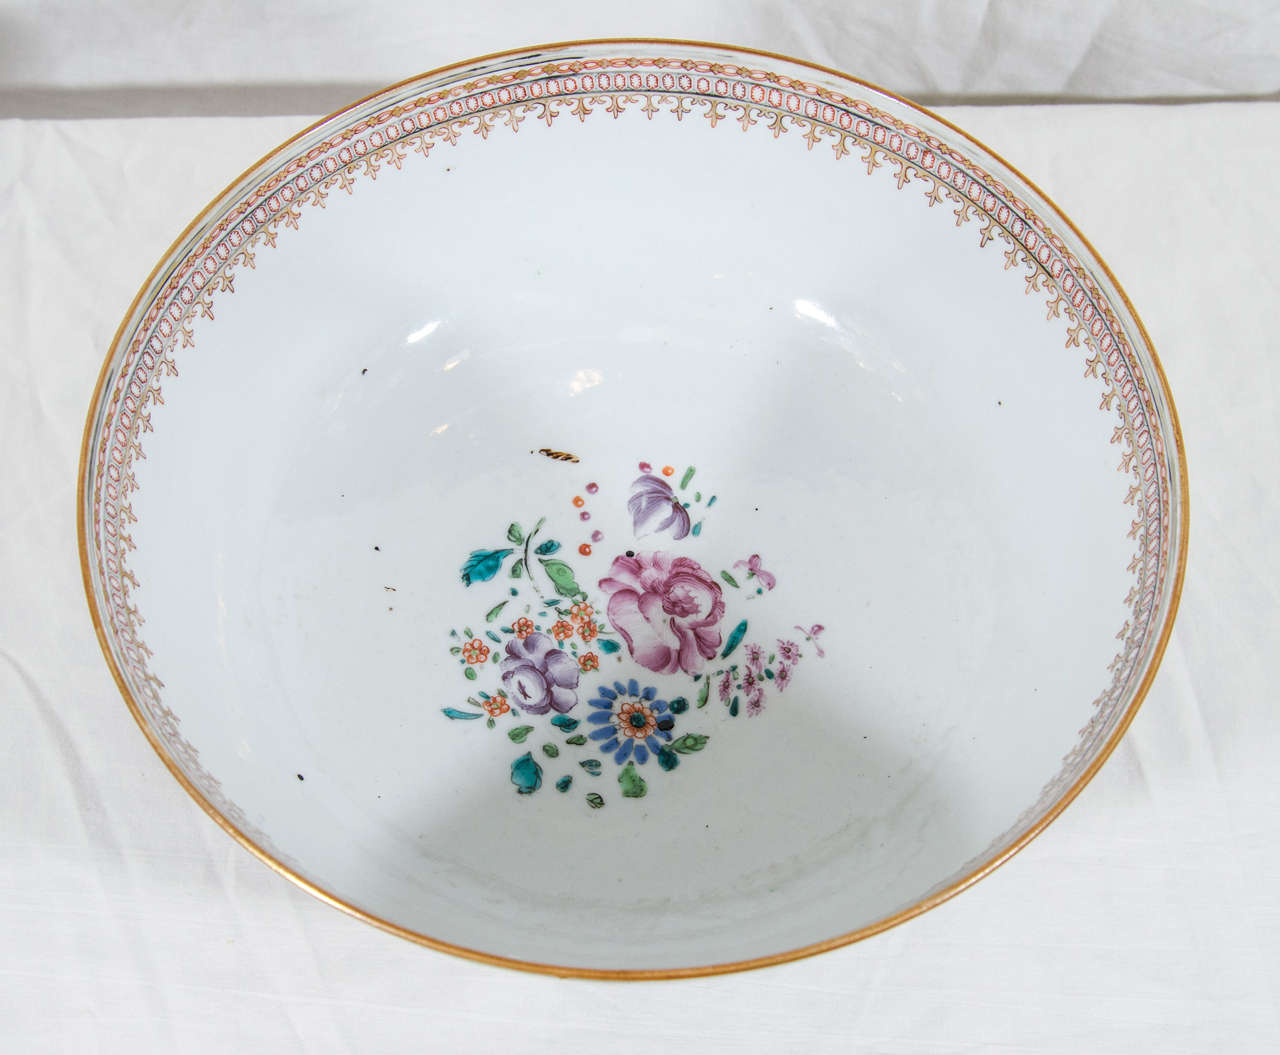 Porcelain Chinese Export Bowl with Mandarins